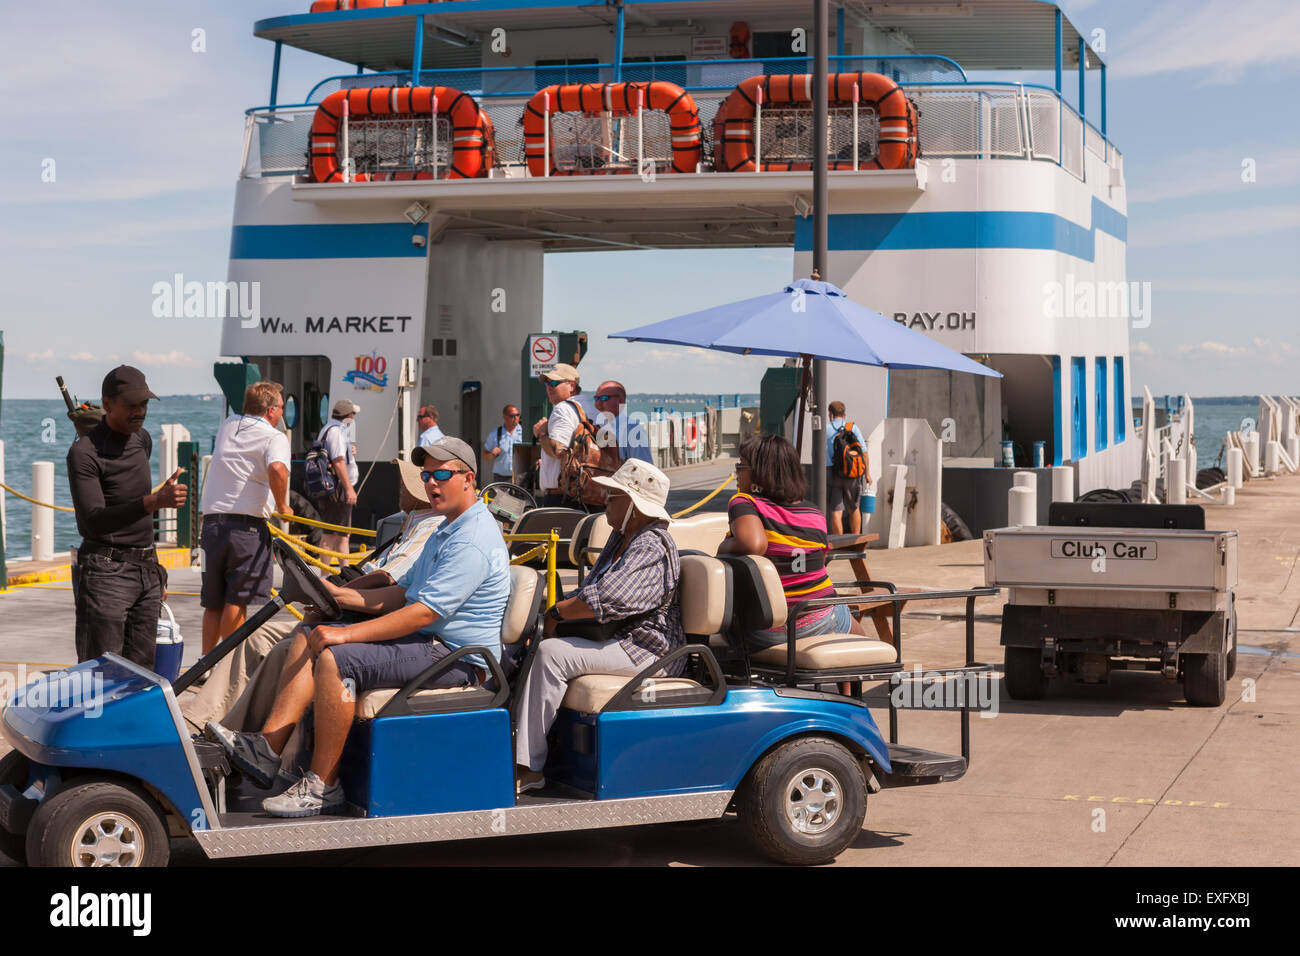 A golf cart prepares to take passengers up the hill from the ferry terminal after arriving in Put-in-Bay, Ohio. Stock Photo